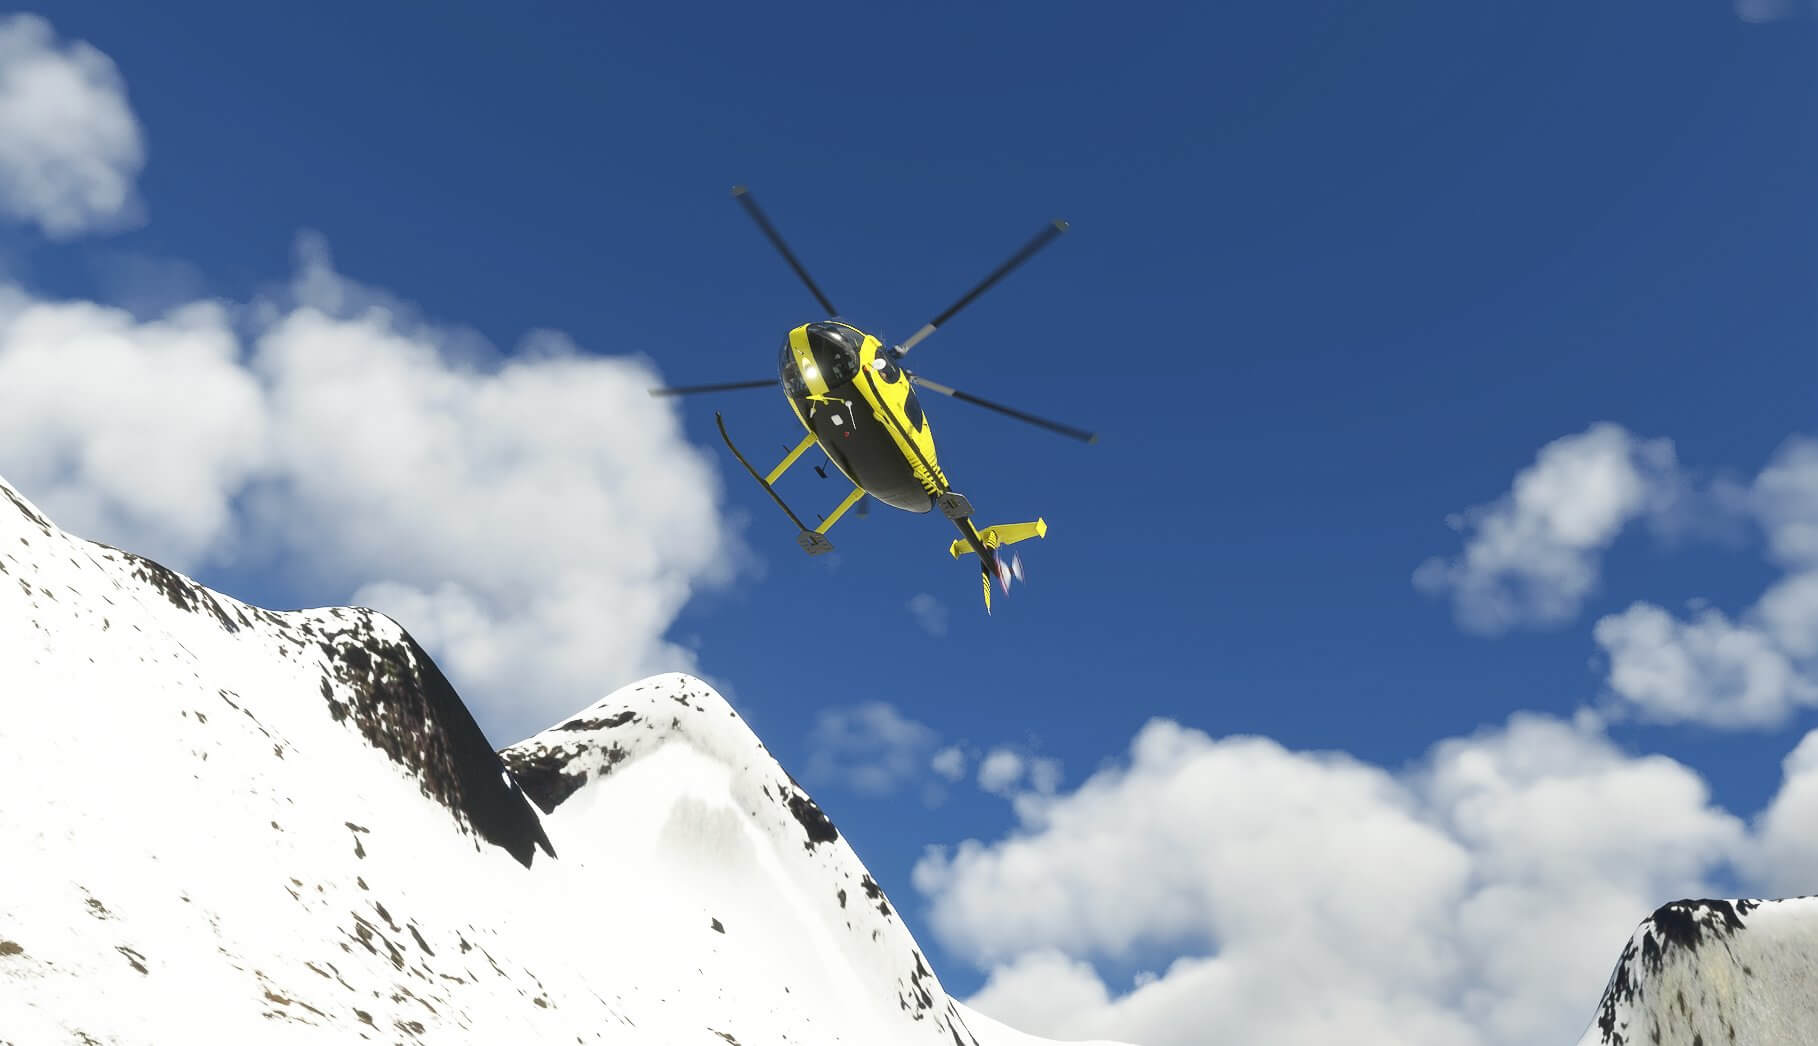 A bottom-up view of a yellow and black helicopter flying over snowy mountain scenery.